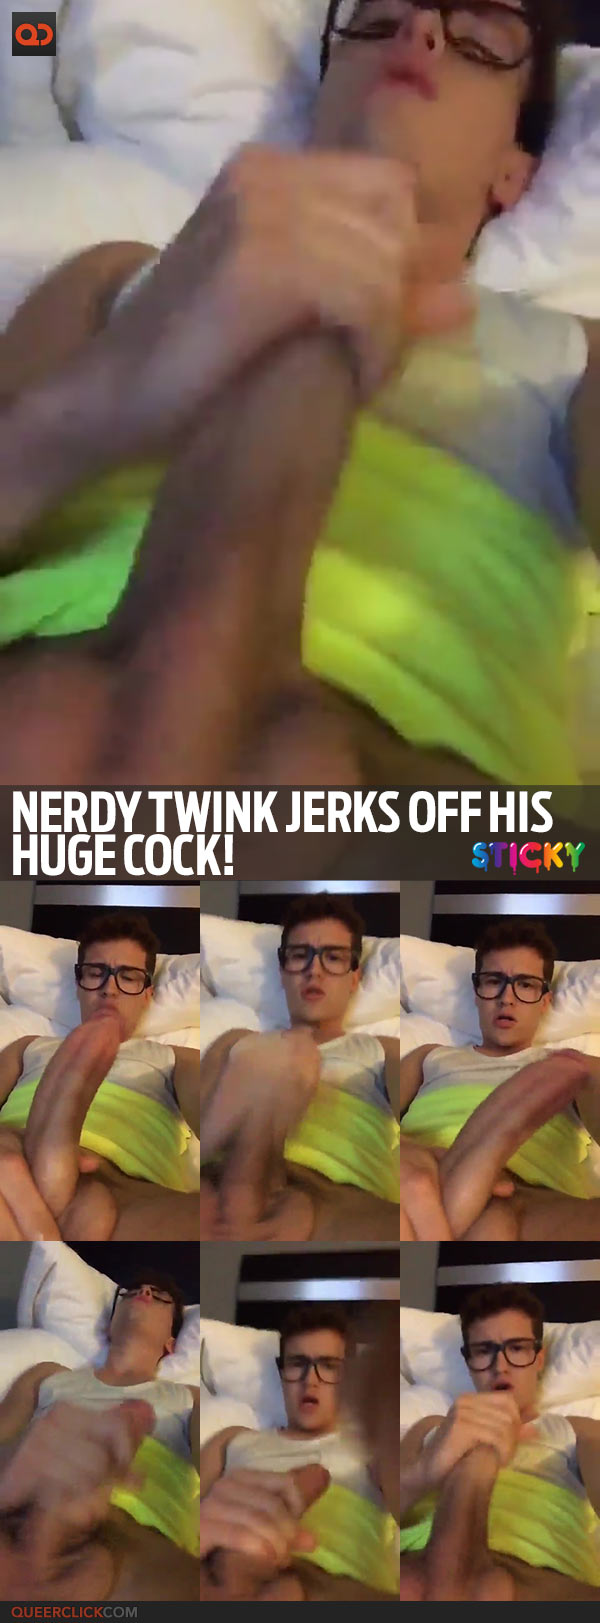 Nerdy Twink Jerks Off His Huge Cock!